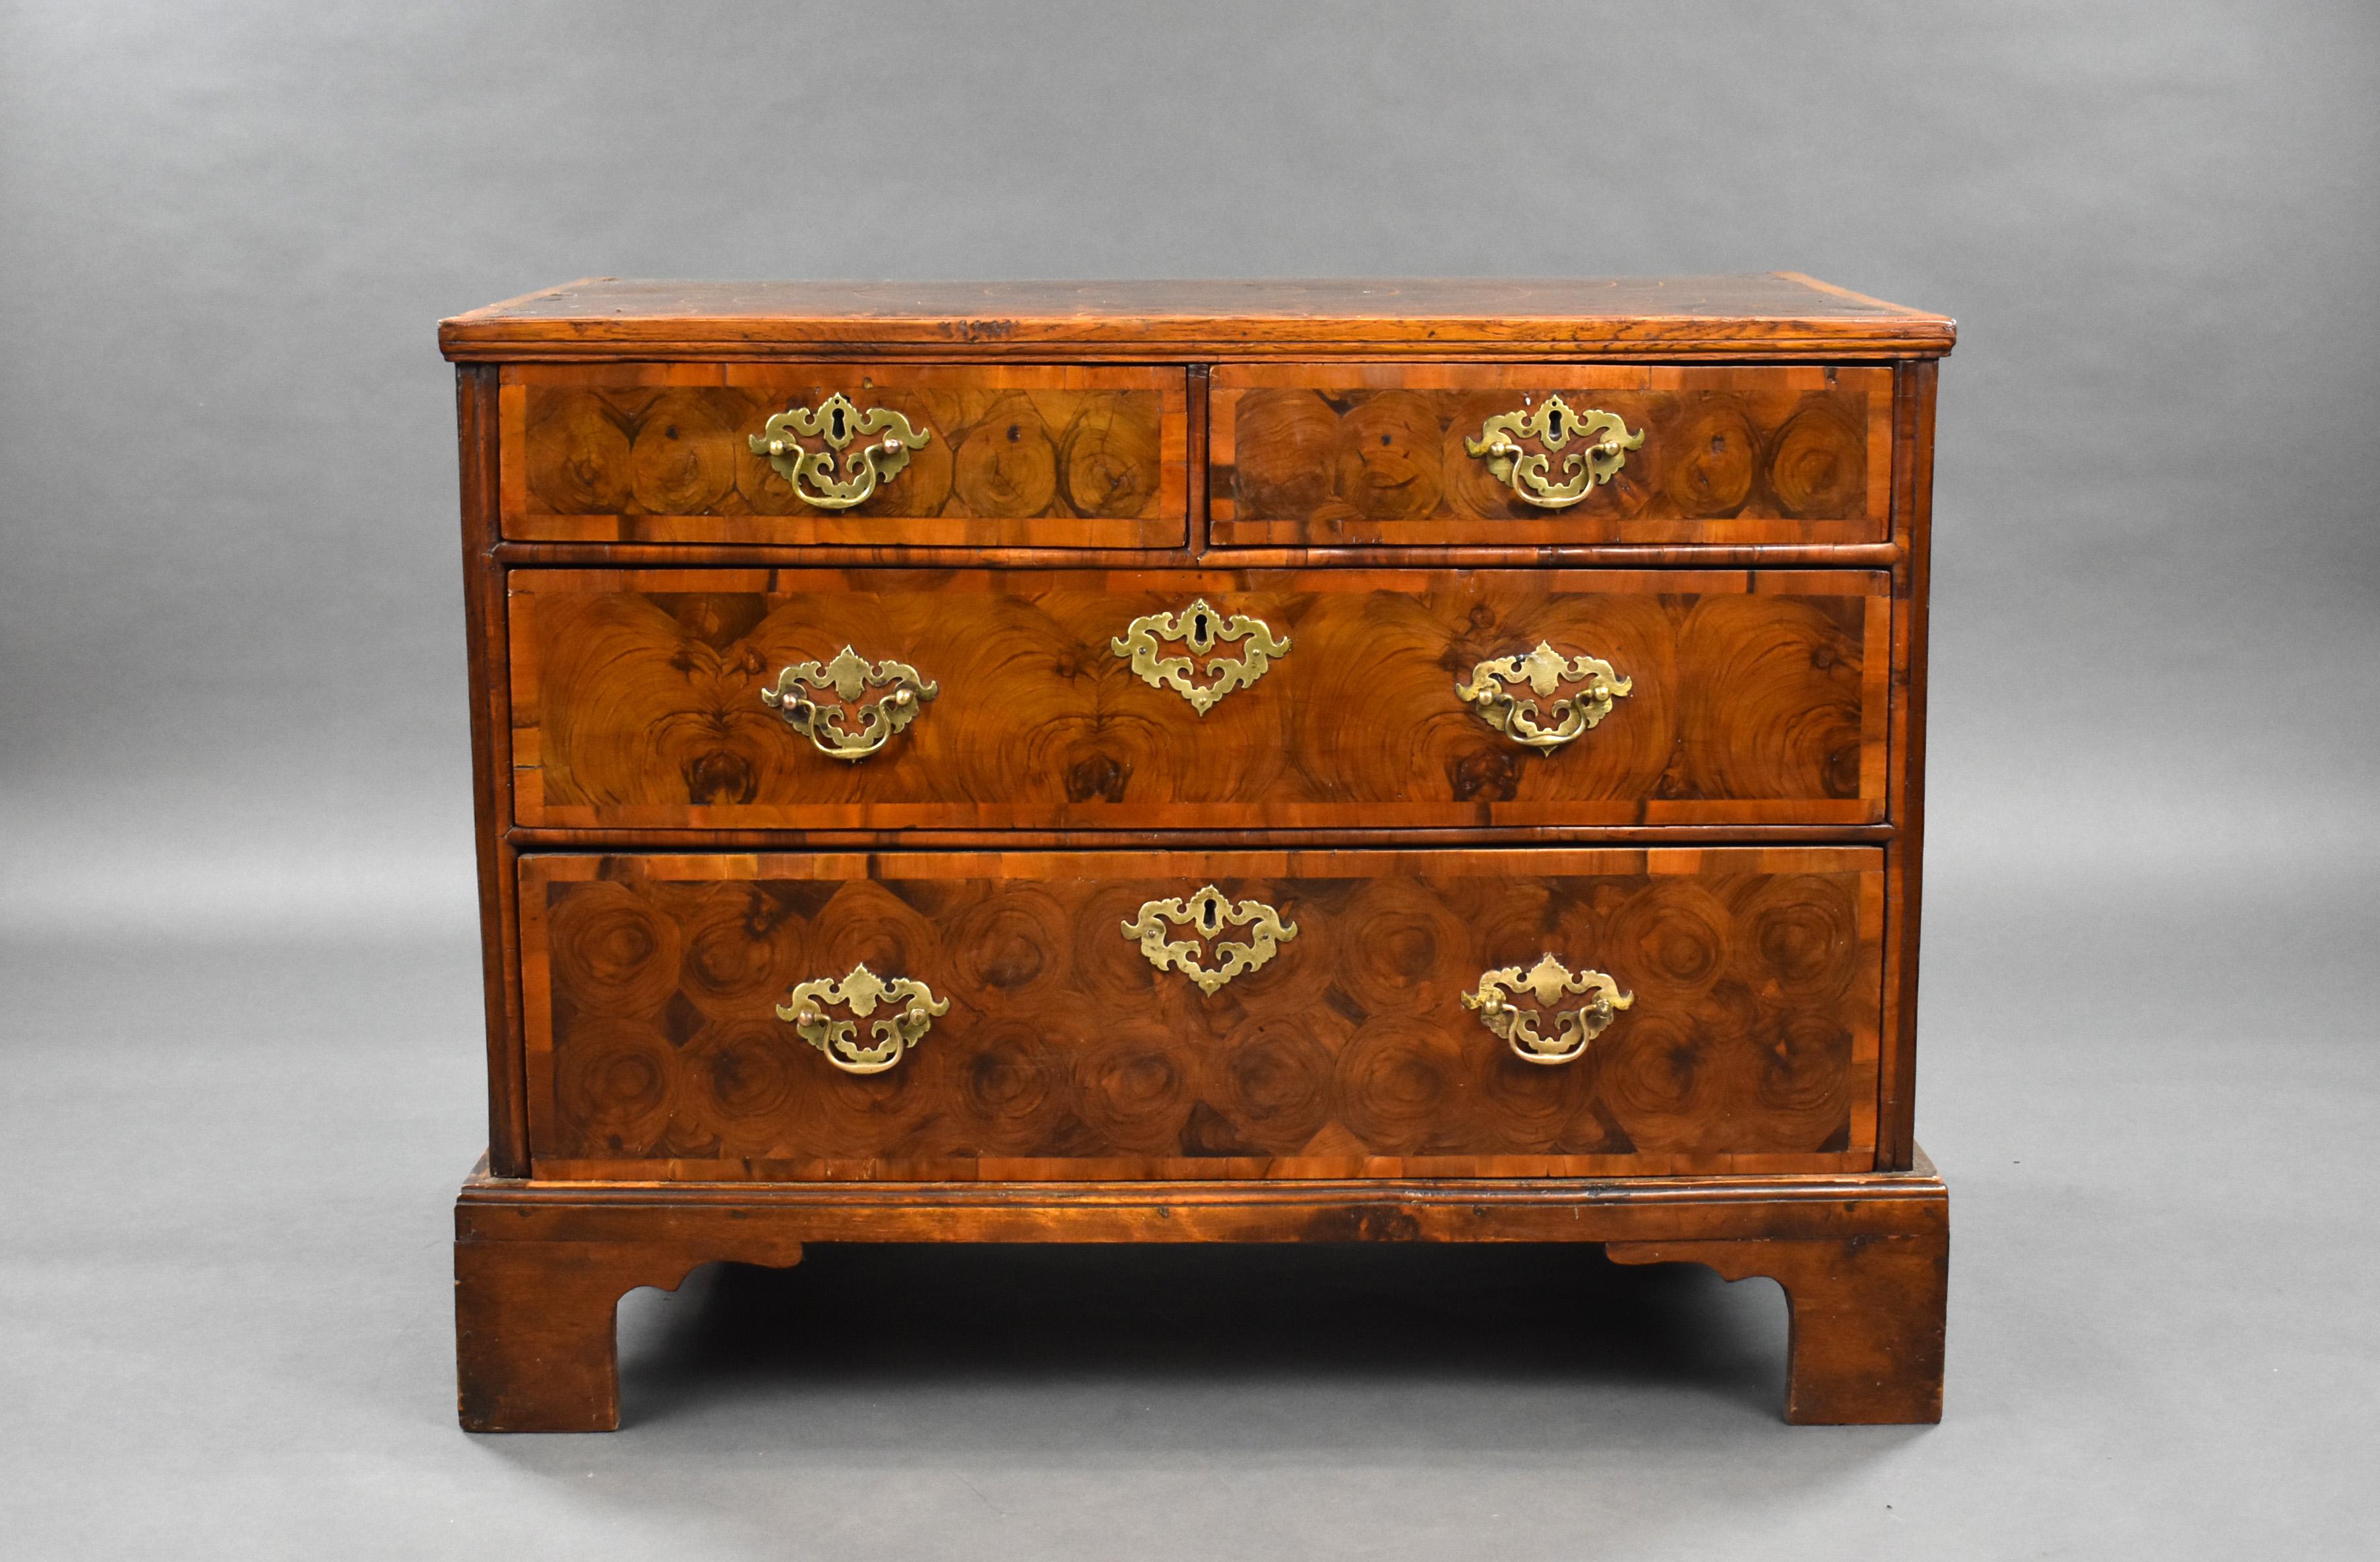 Queen Anne Early 18th Century English Walnut Oyster Veneer Chest of Drawers For Sale